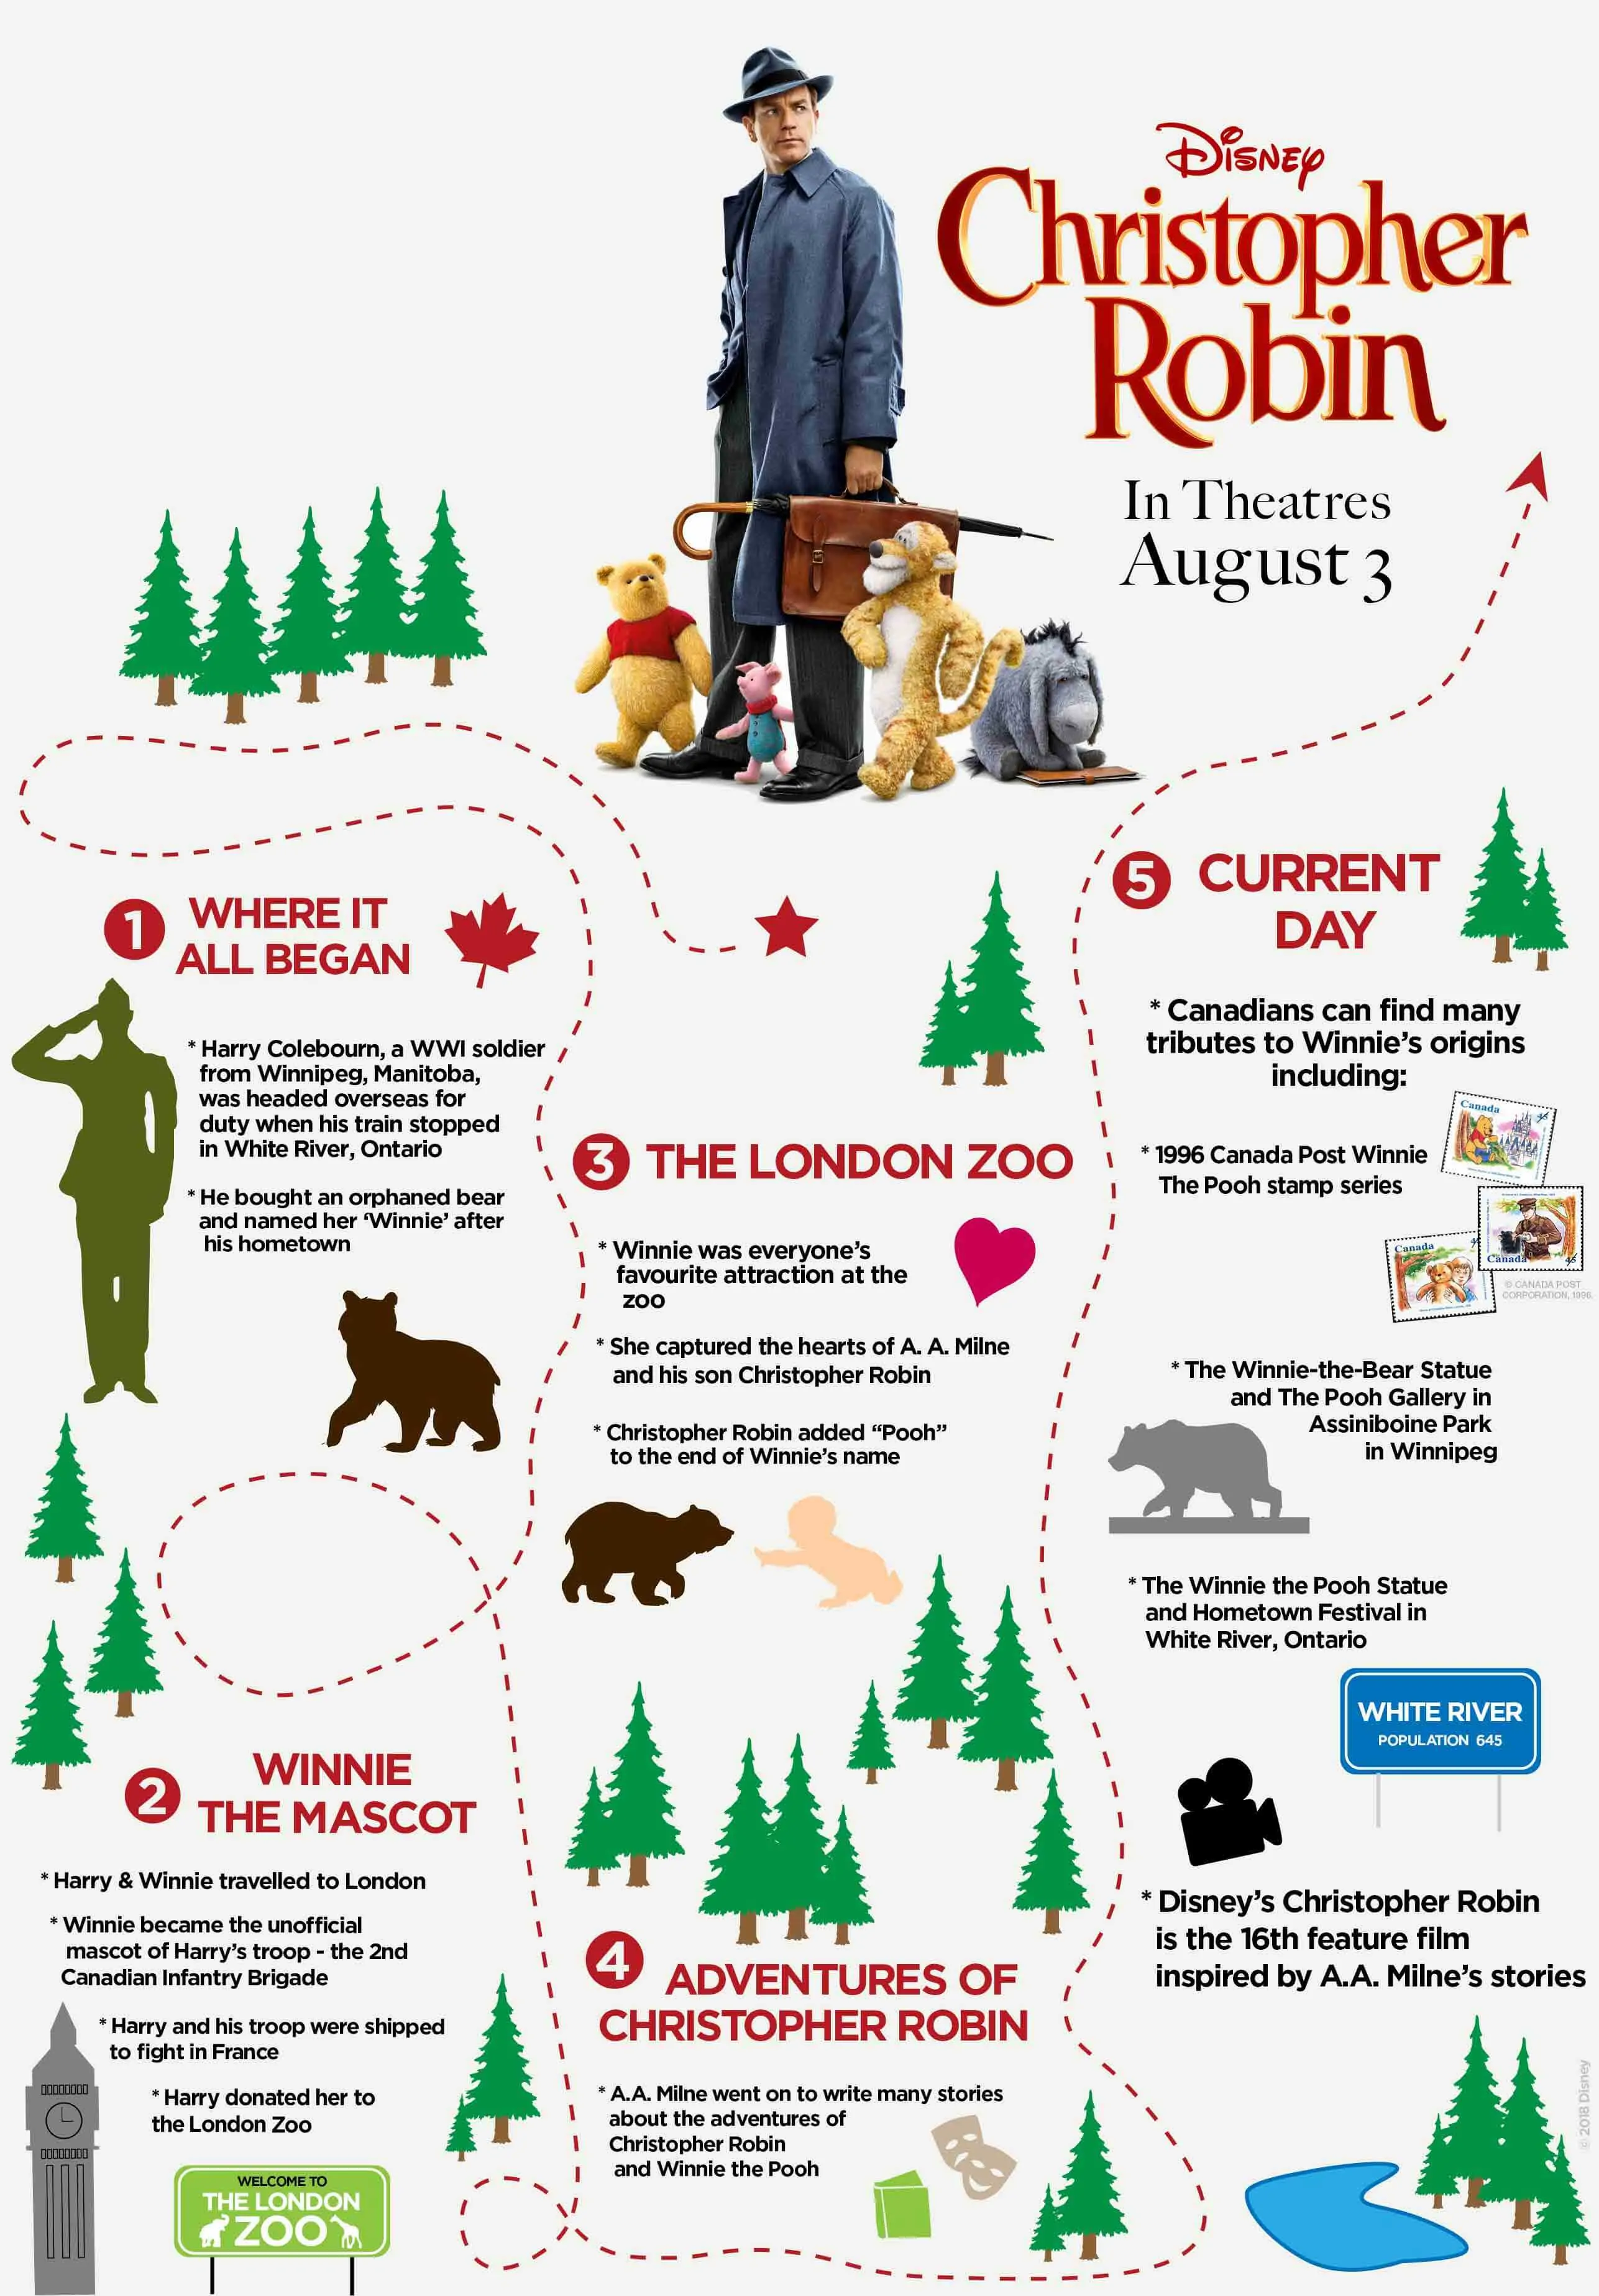 Winnie The Pooh journey from Winnipeg to the Hundred Acre Wood